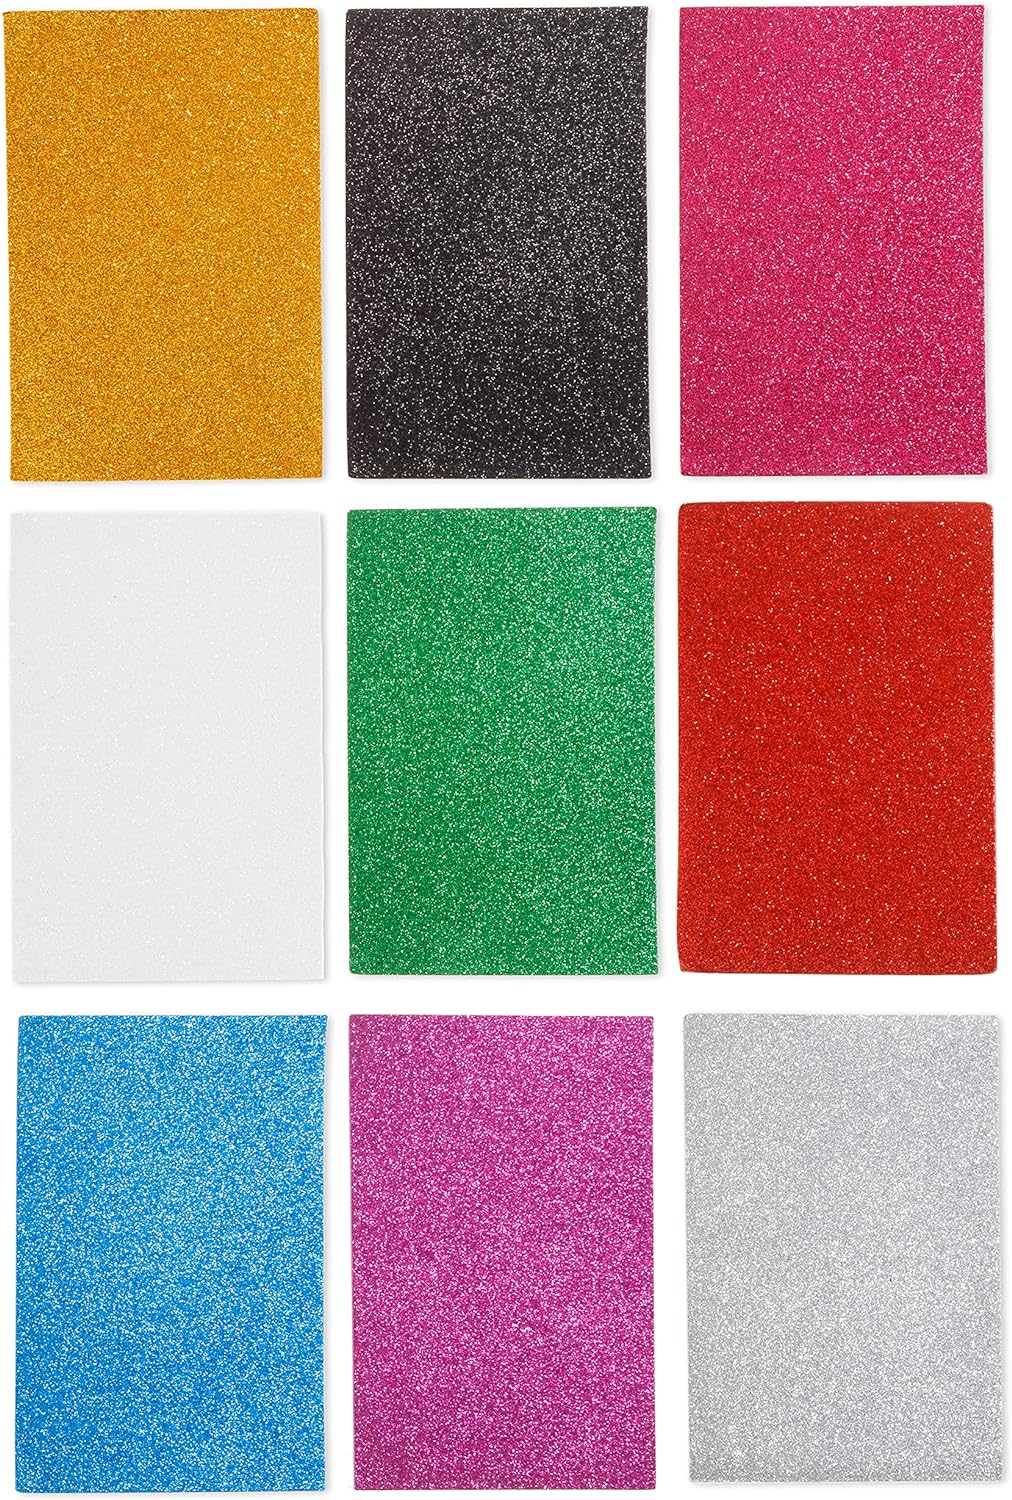 Glitter Foam Sheets Self Adhesive 12 Pack 6x9 Sticky Back Craft Foam Sheets In Assorted Sparkly Colors 2mm Eva Foam For Kids Crafts And Art Projects By PAIDU